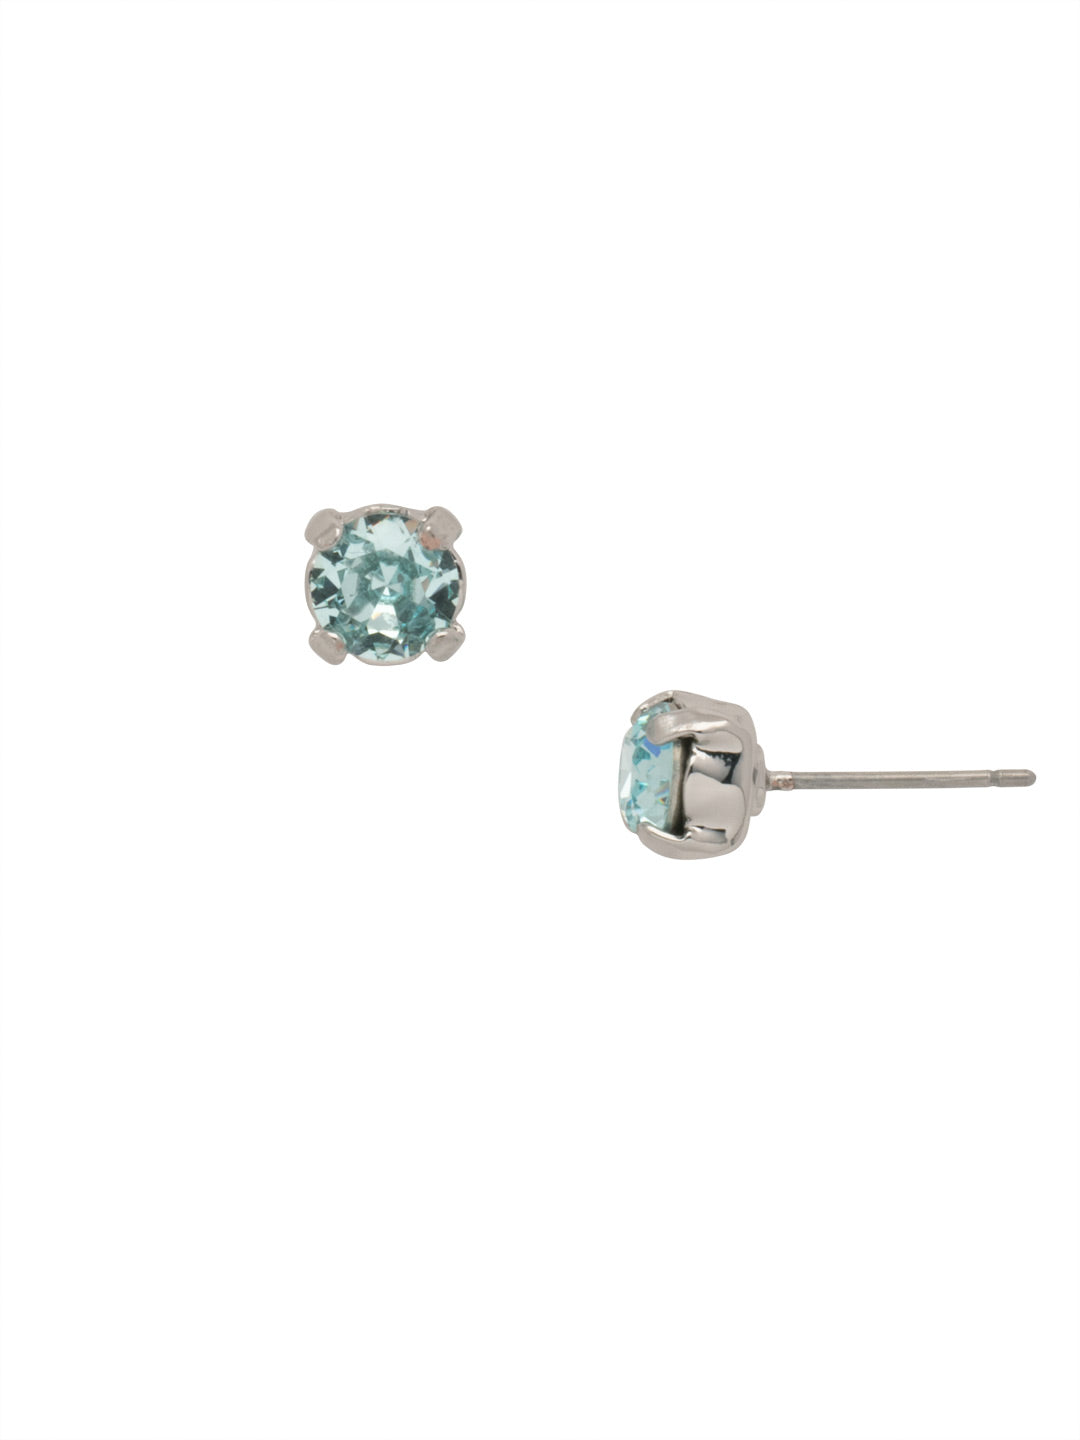 Jayda Stud Earrings - EDN32PDAQU - <p>The Jayda Stud Earrings are the perfect every day wardrobe staple. A round crystal nestles perfectly in a metal plated post with four prongs. </p><p>Need help picking a stud? <a href="https://www.sorrelli.com/blogs/sisterhood/round-stud-earrings-101-a-rundown-of-sizes-styles-and-sparkle">Check out our size guide!</a> From Sorrelli's Aquamarine collection in our Palladium finish.</p>